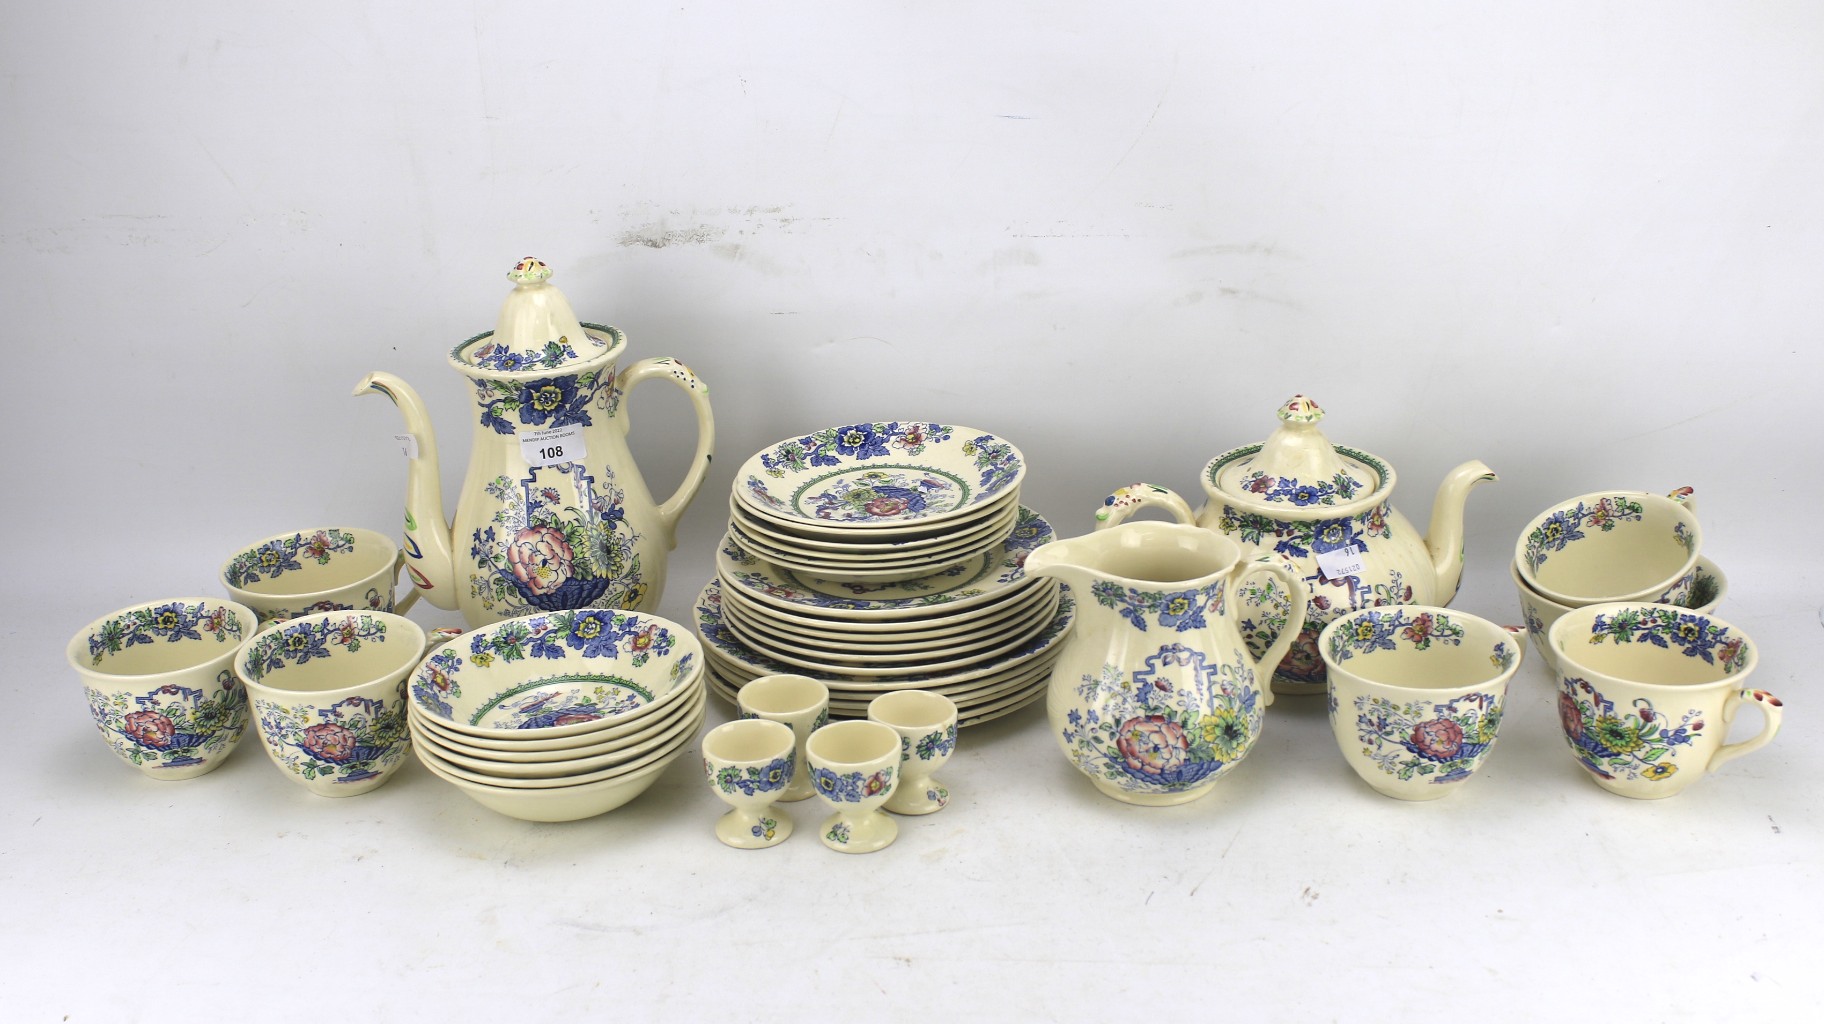 A Mason's part tea service in the 'Strathmore' pattern.